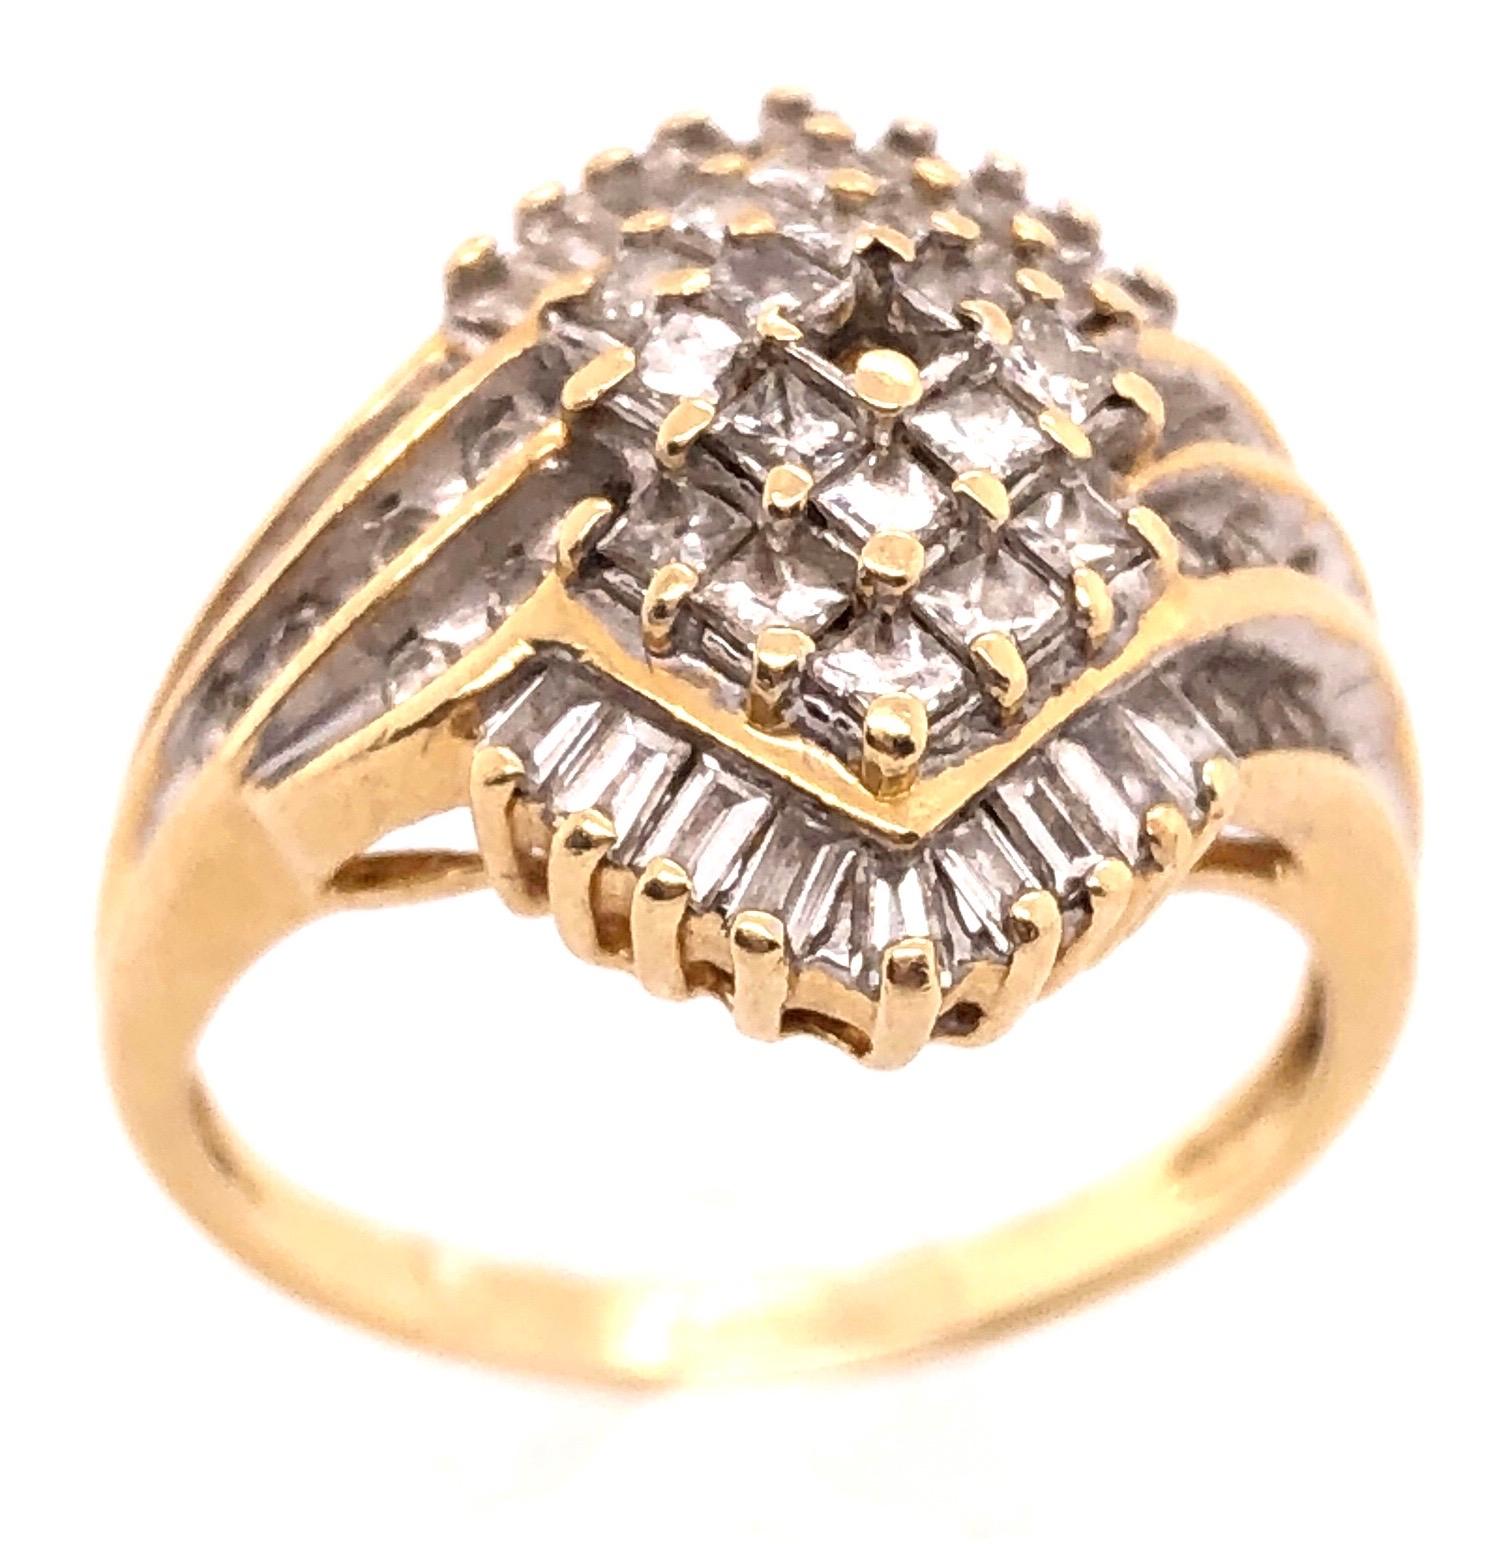 14 Karat Yellow Gold Ring With Diamond Cluster
Size 6.5
5.3 grams total weight.